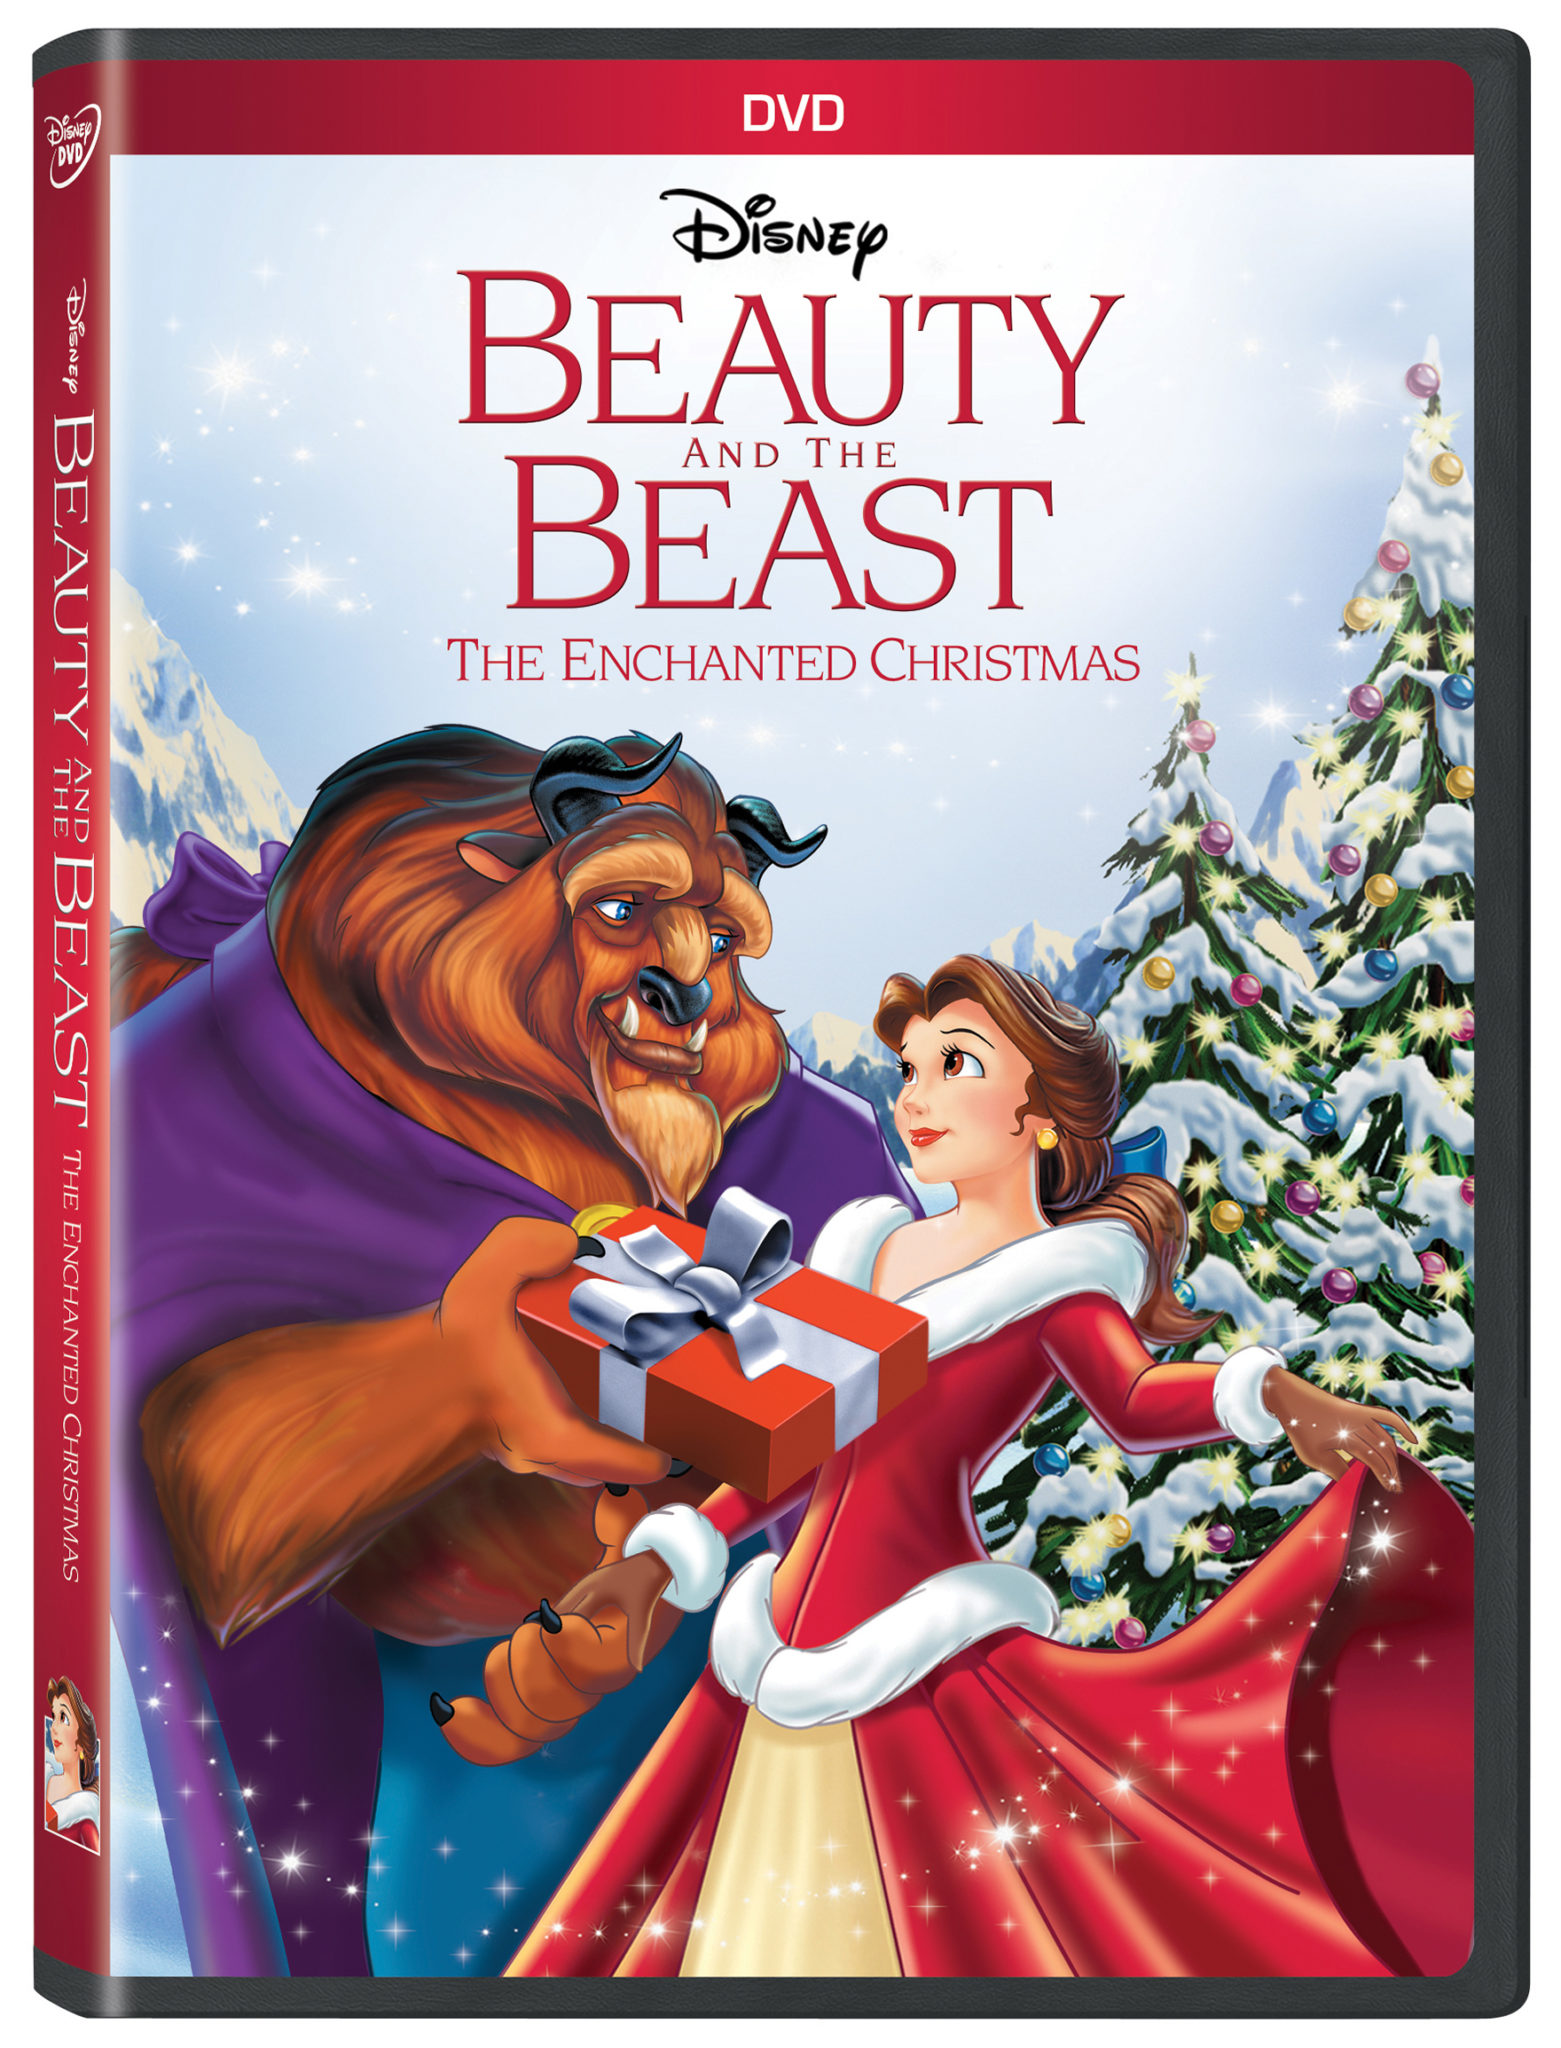 You Can Celebrate The Holidays With Belle And The Beast